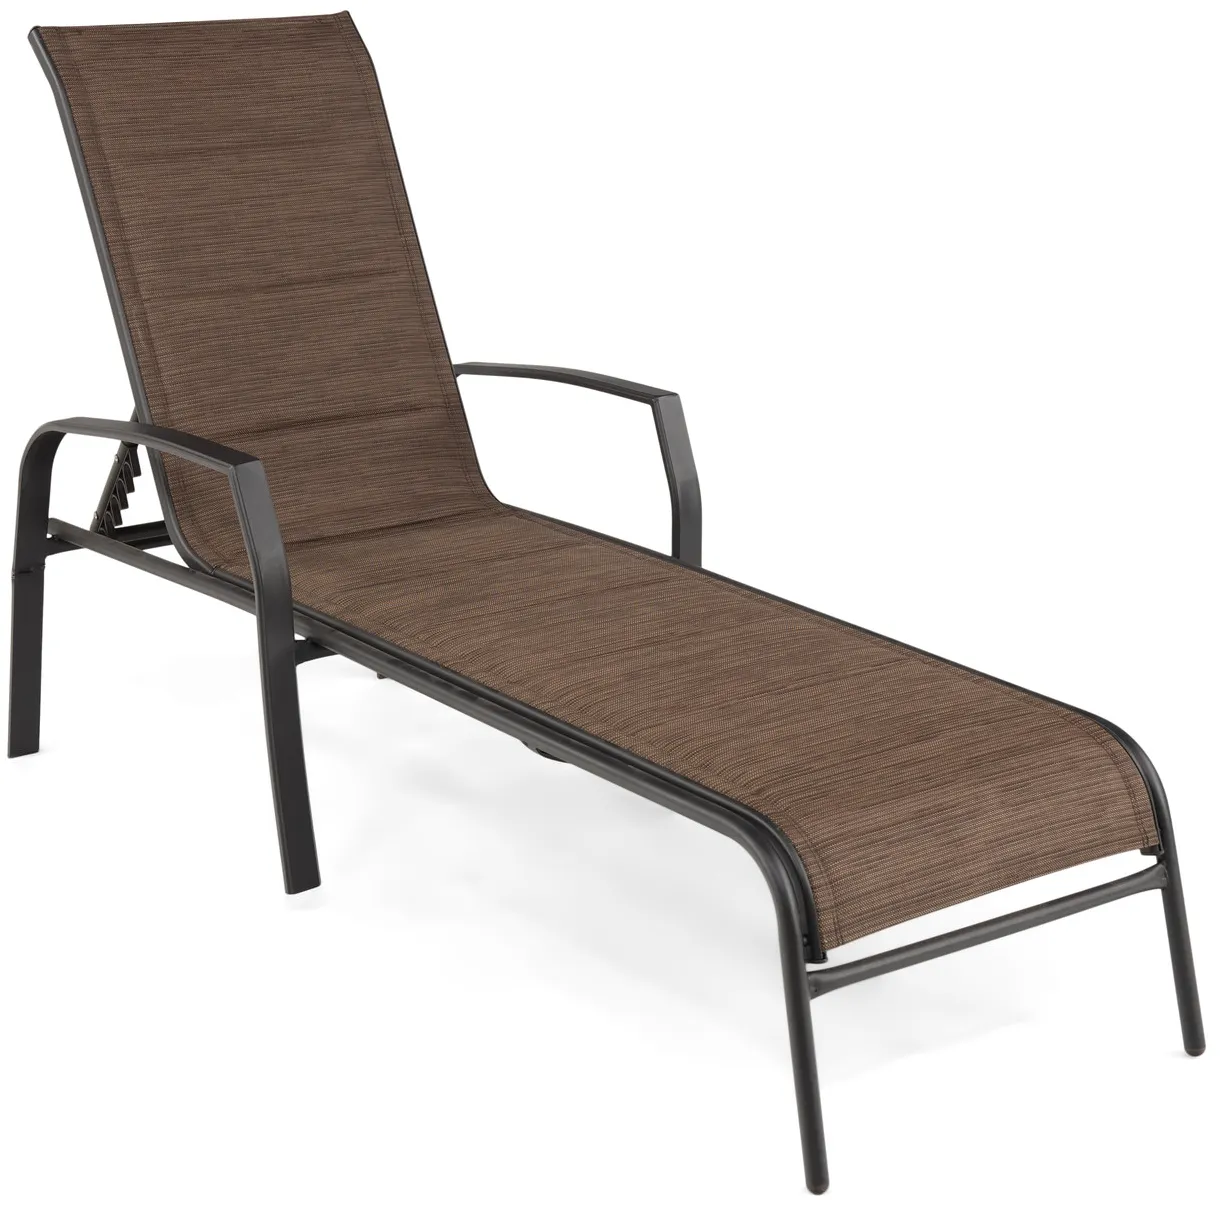 St Croix Chaise Lounge - Padded 